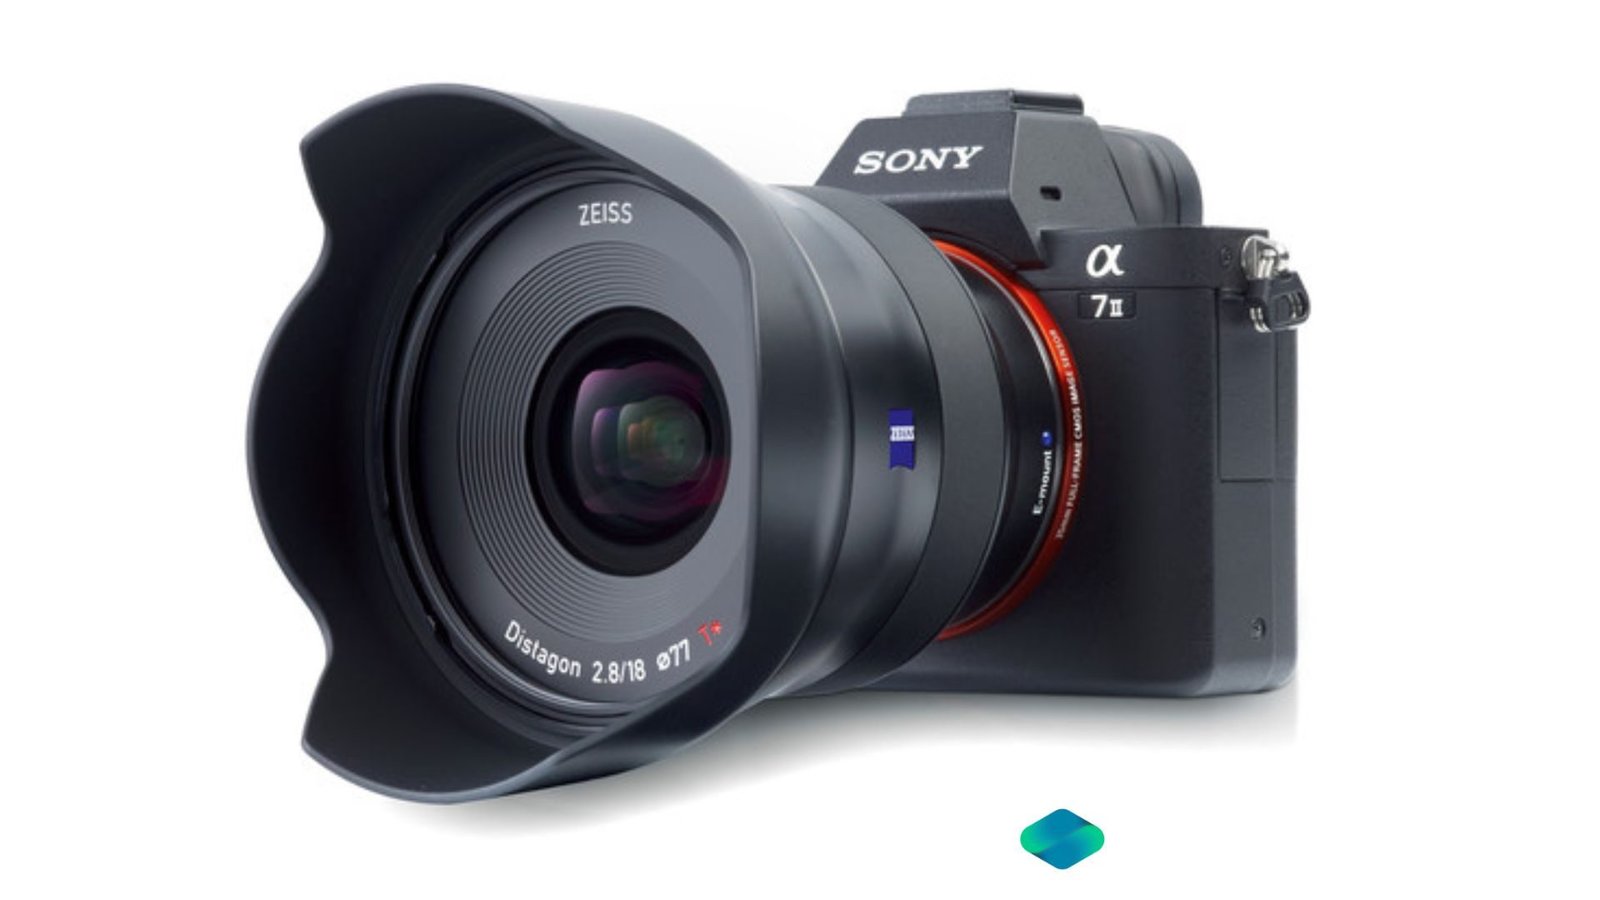 Rent ZEISS Batis Lens for Sony E Mount 2.8/18 in Delhi NCR, Camera, Camera lenses for rent, Camera accessories, in Delhi Gurgaon Noida, hire Shooting equipment, Lighting equipment rental, Film gear rental for Video production, camera rental company in Delhi, film equipment rental company